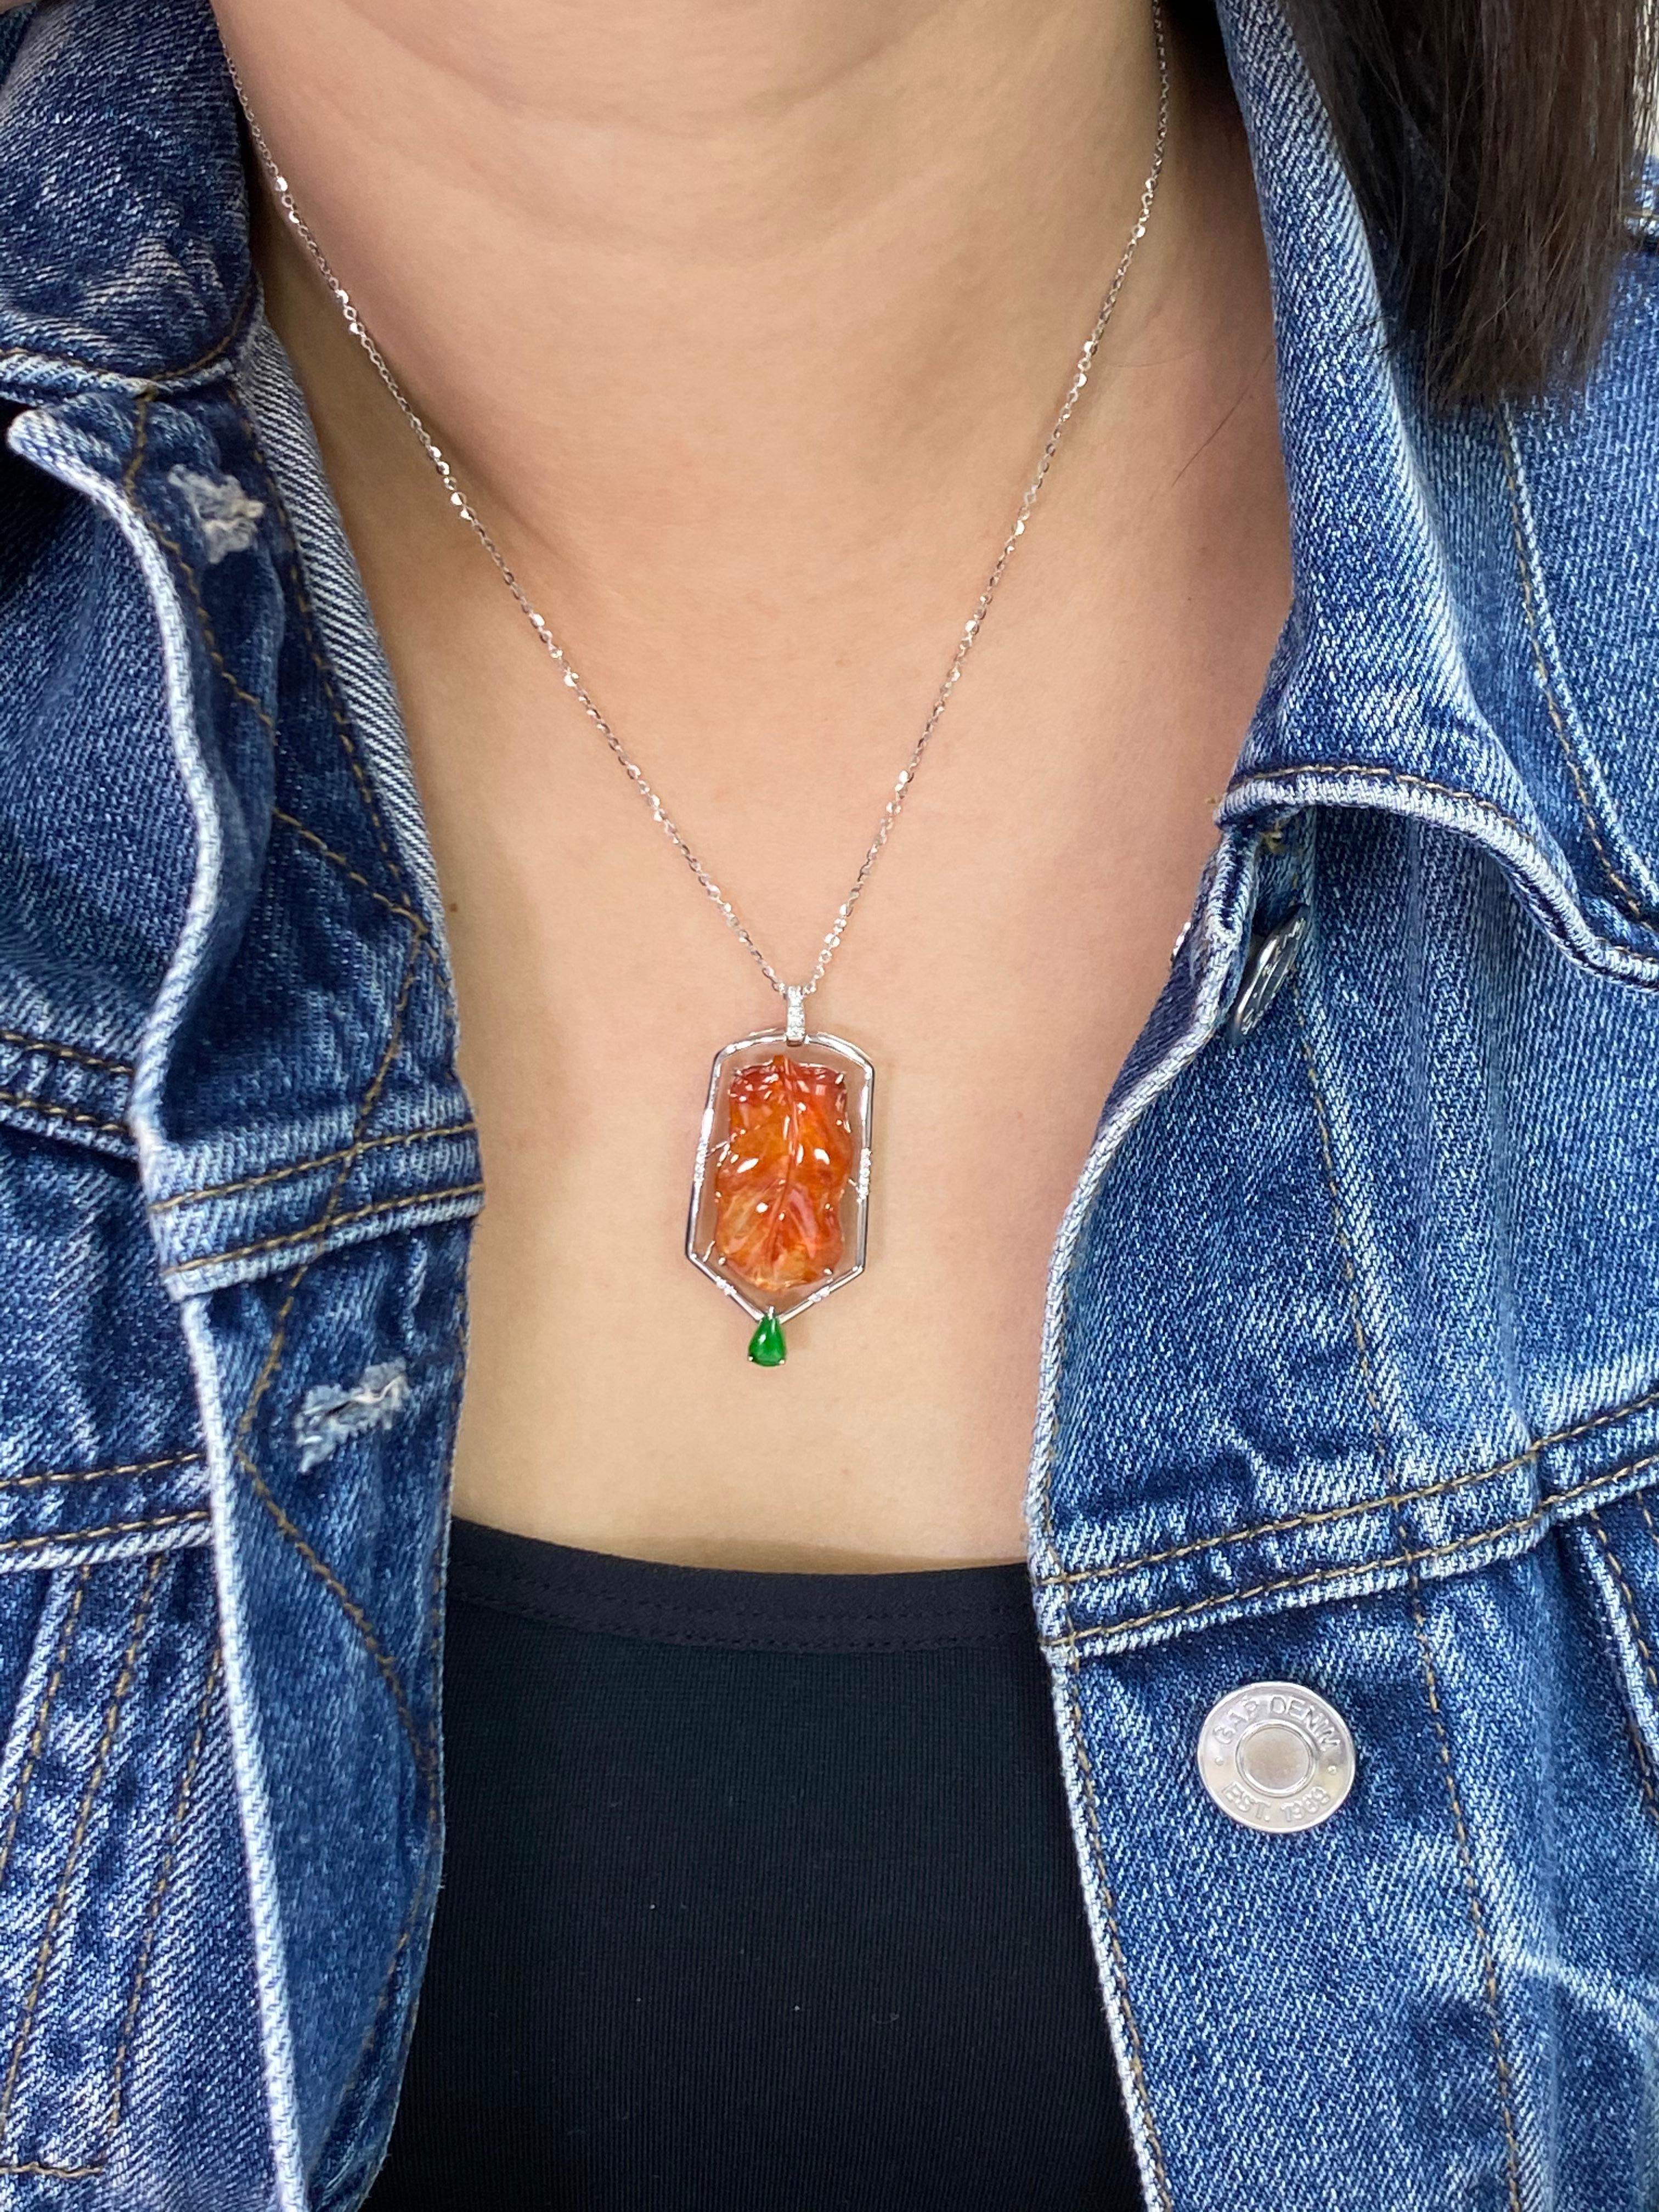 This certified natural red jadeite is not common. It can be beautifully worn with the apple green jade on the top or on the bottom. This pendant drop necklace is designed to be worn two ways for a different look. The red jade is carved with a leaf